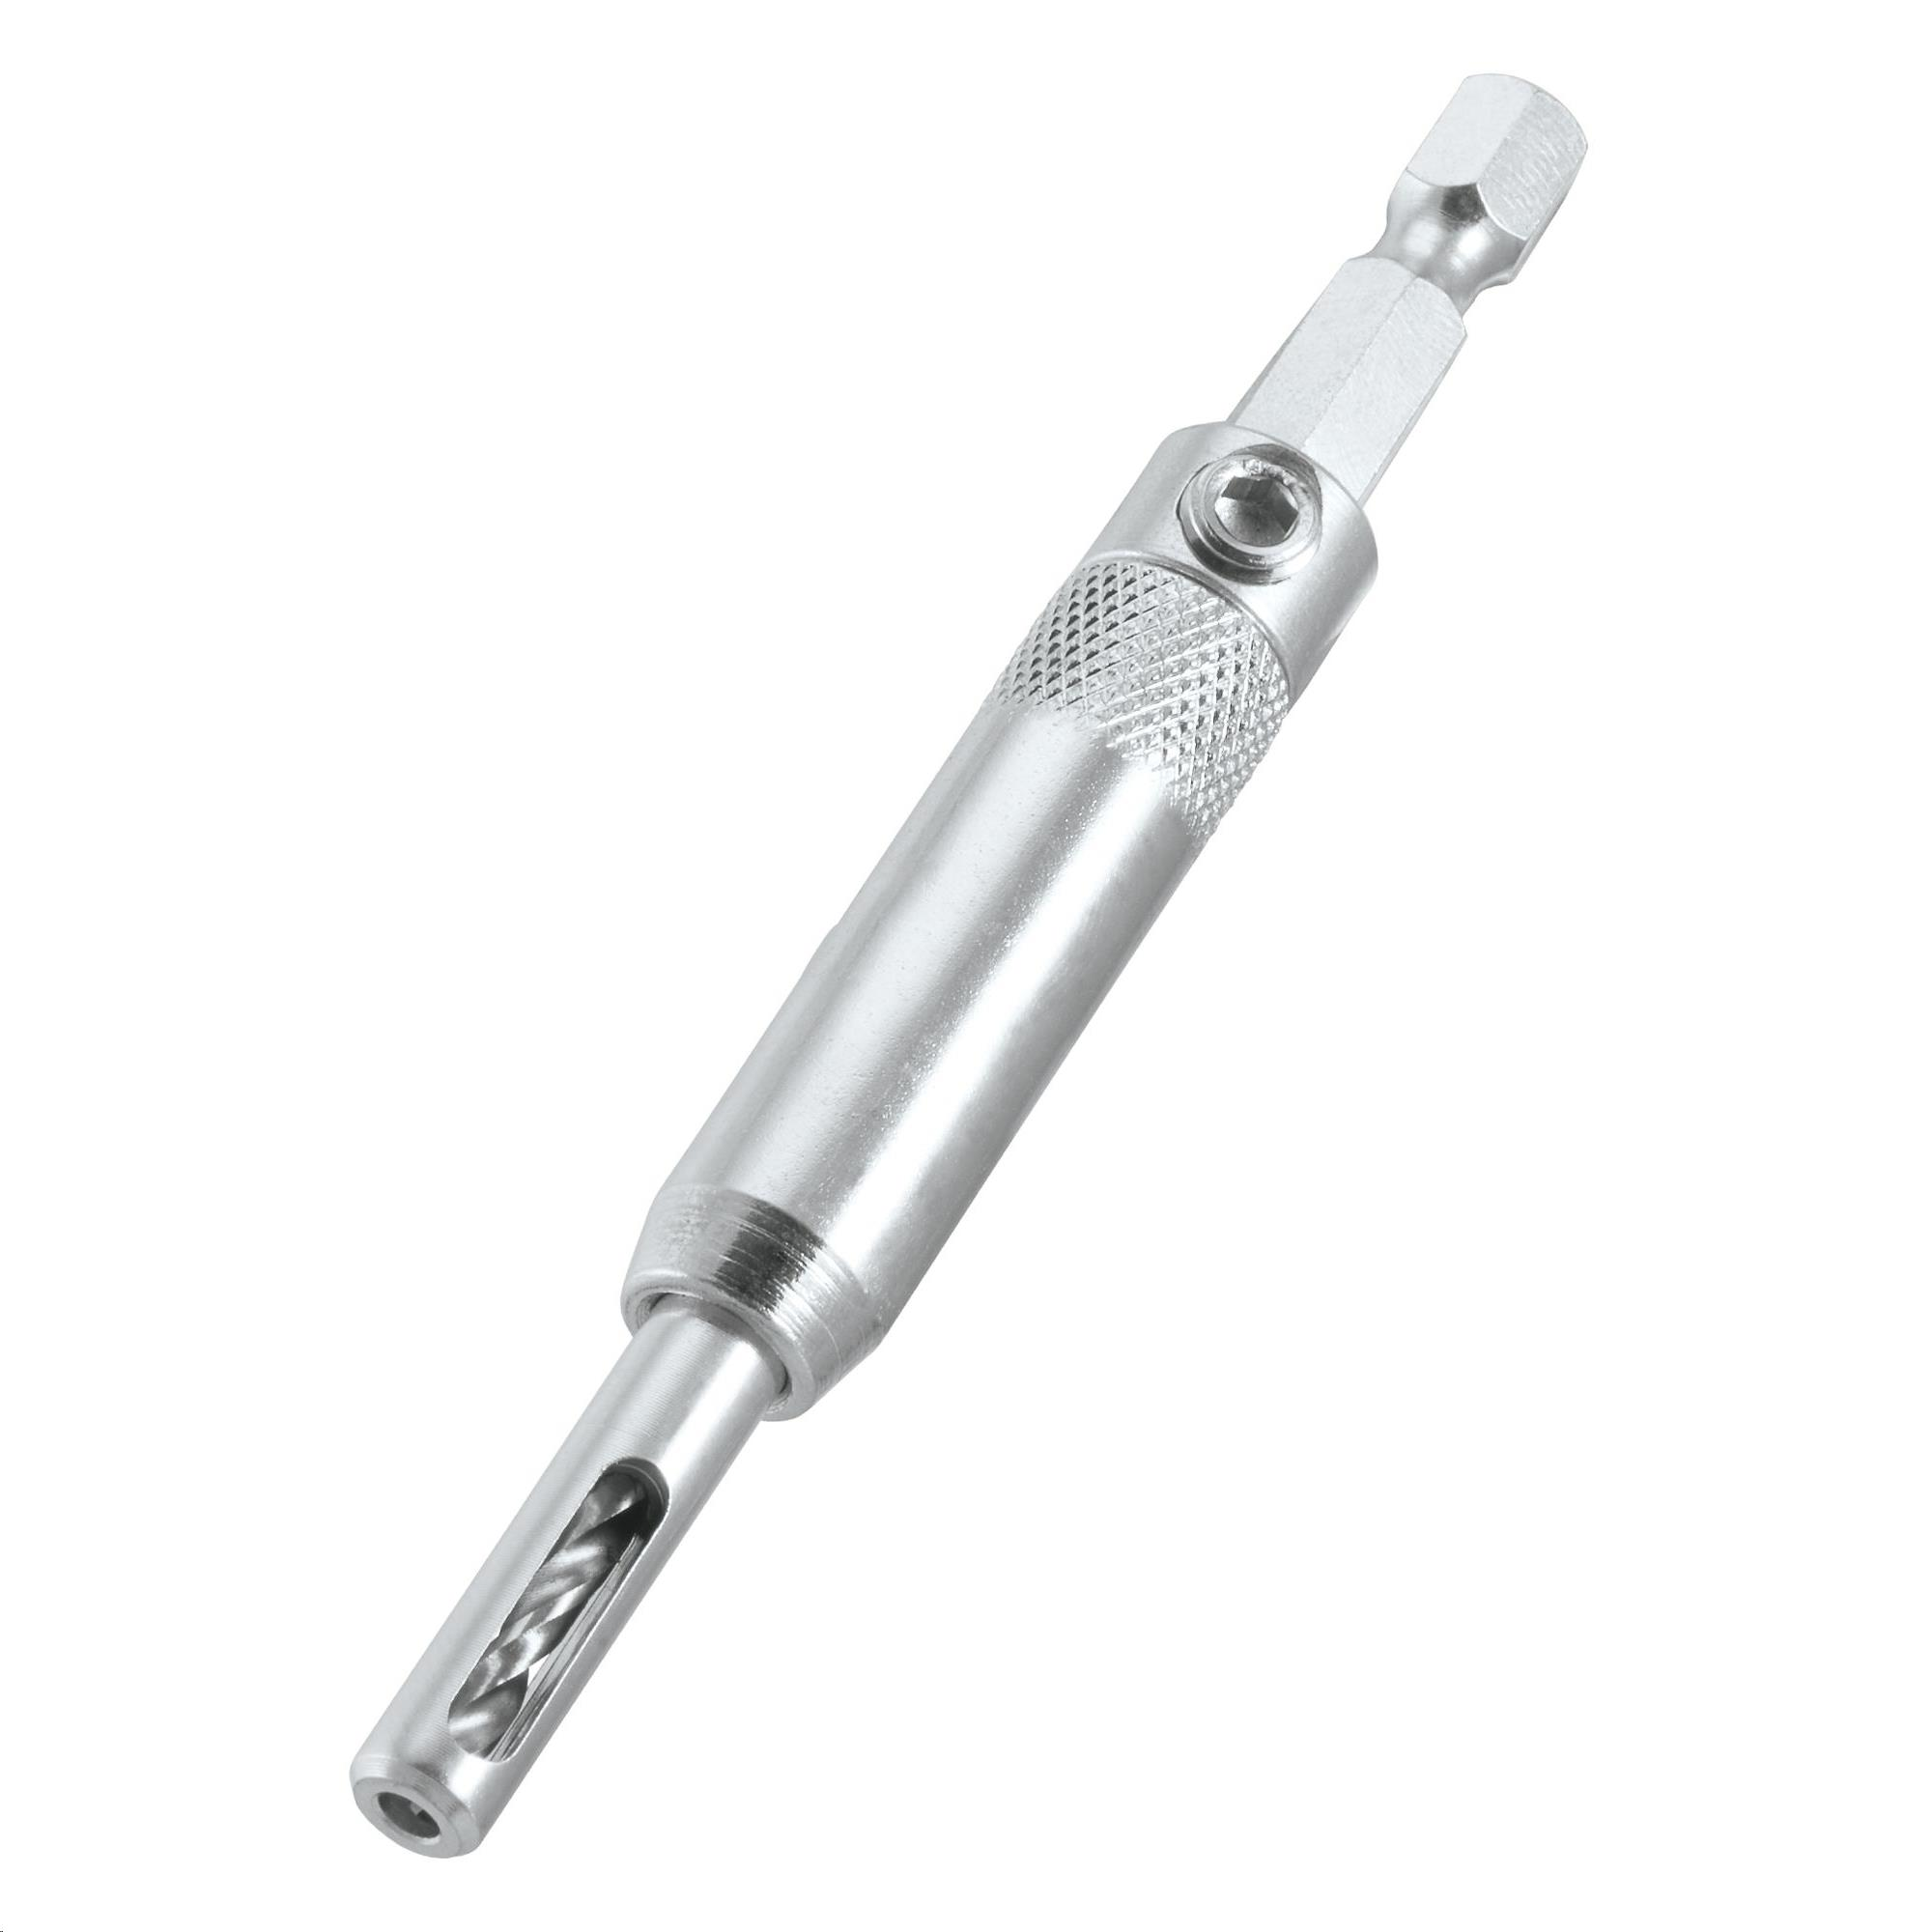 TREND SNAPPY CENTRING GUIDE 7/64" (2.75MM) DRILL